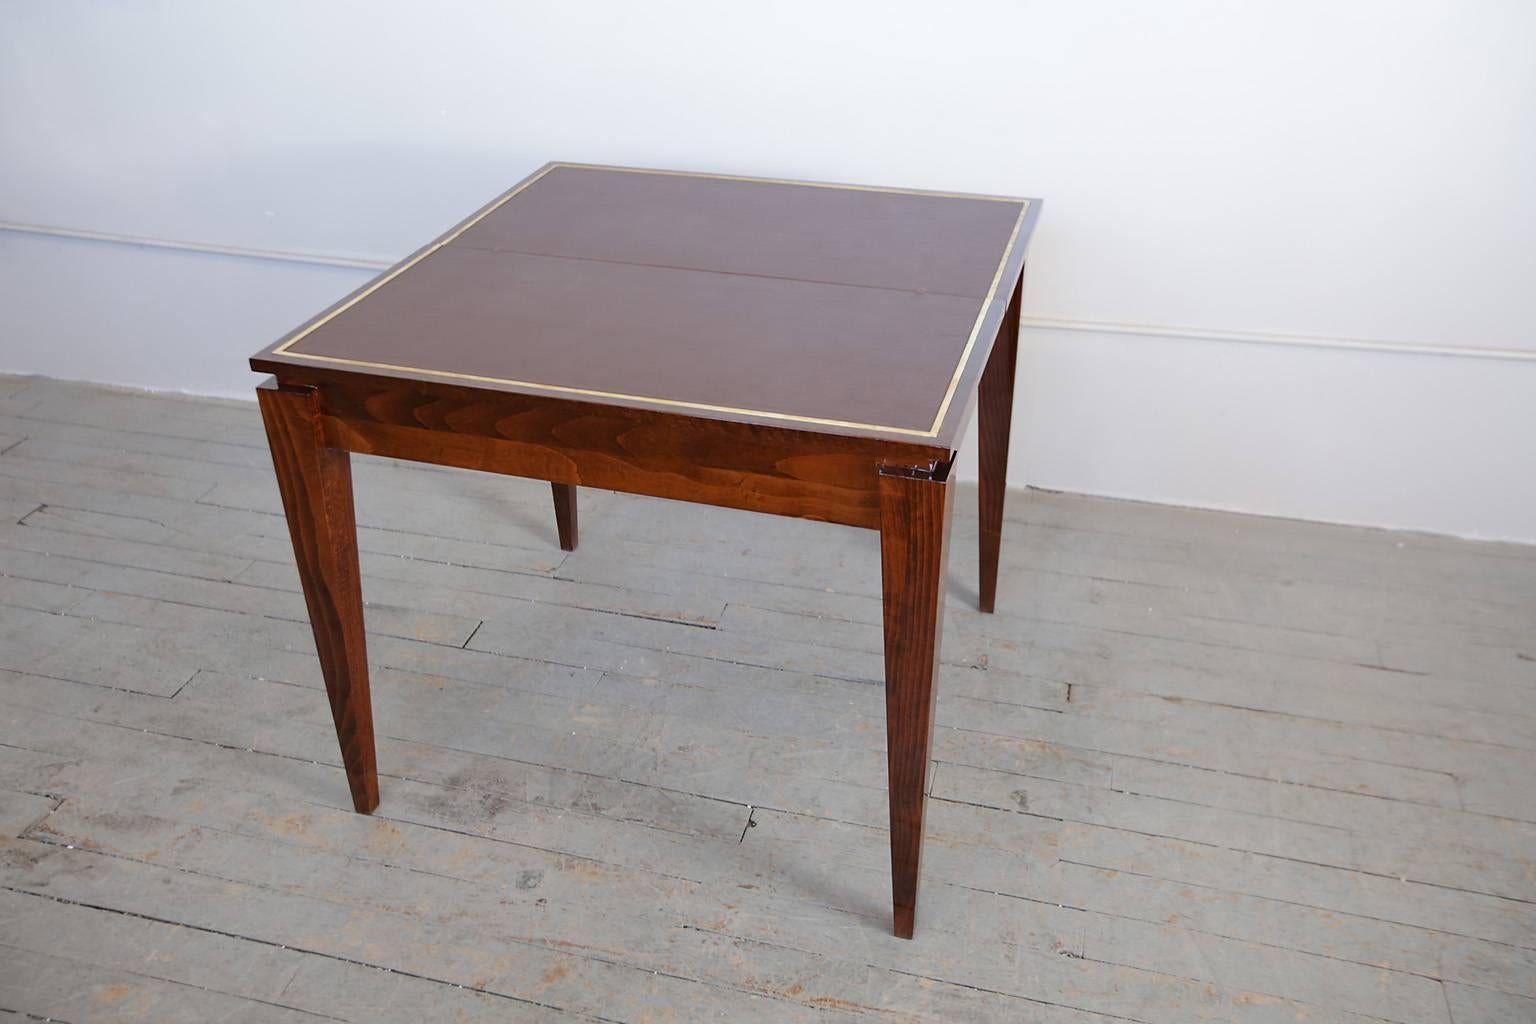 Console table opens up to a card table. 
When open this card table measures 34' x 34" x 29.75"
When closed this table can serve as a console table measuring 34" x 17" x 30.5".
Walnut wood with leather top.